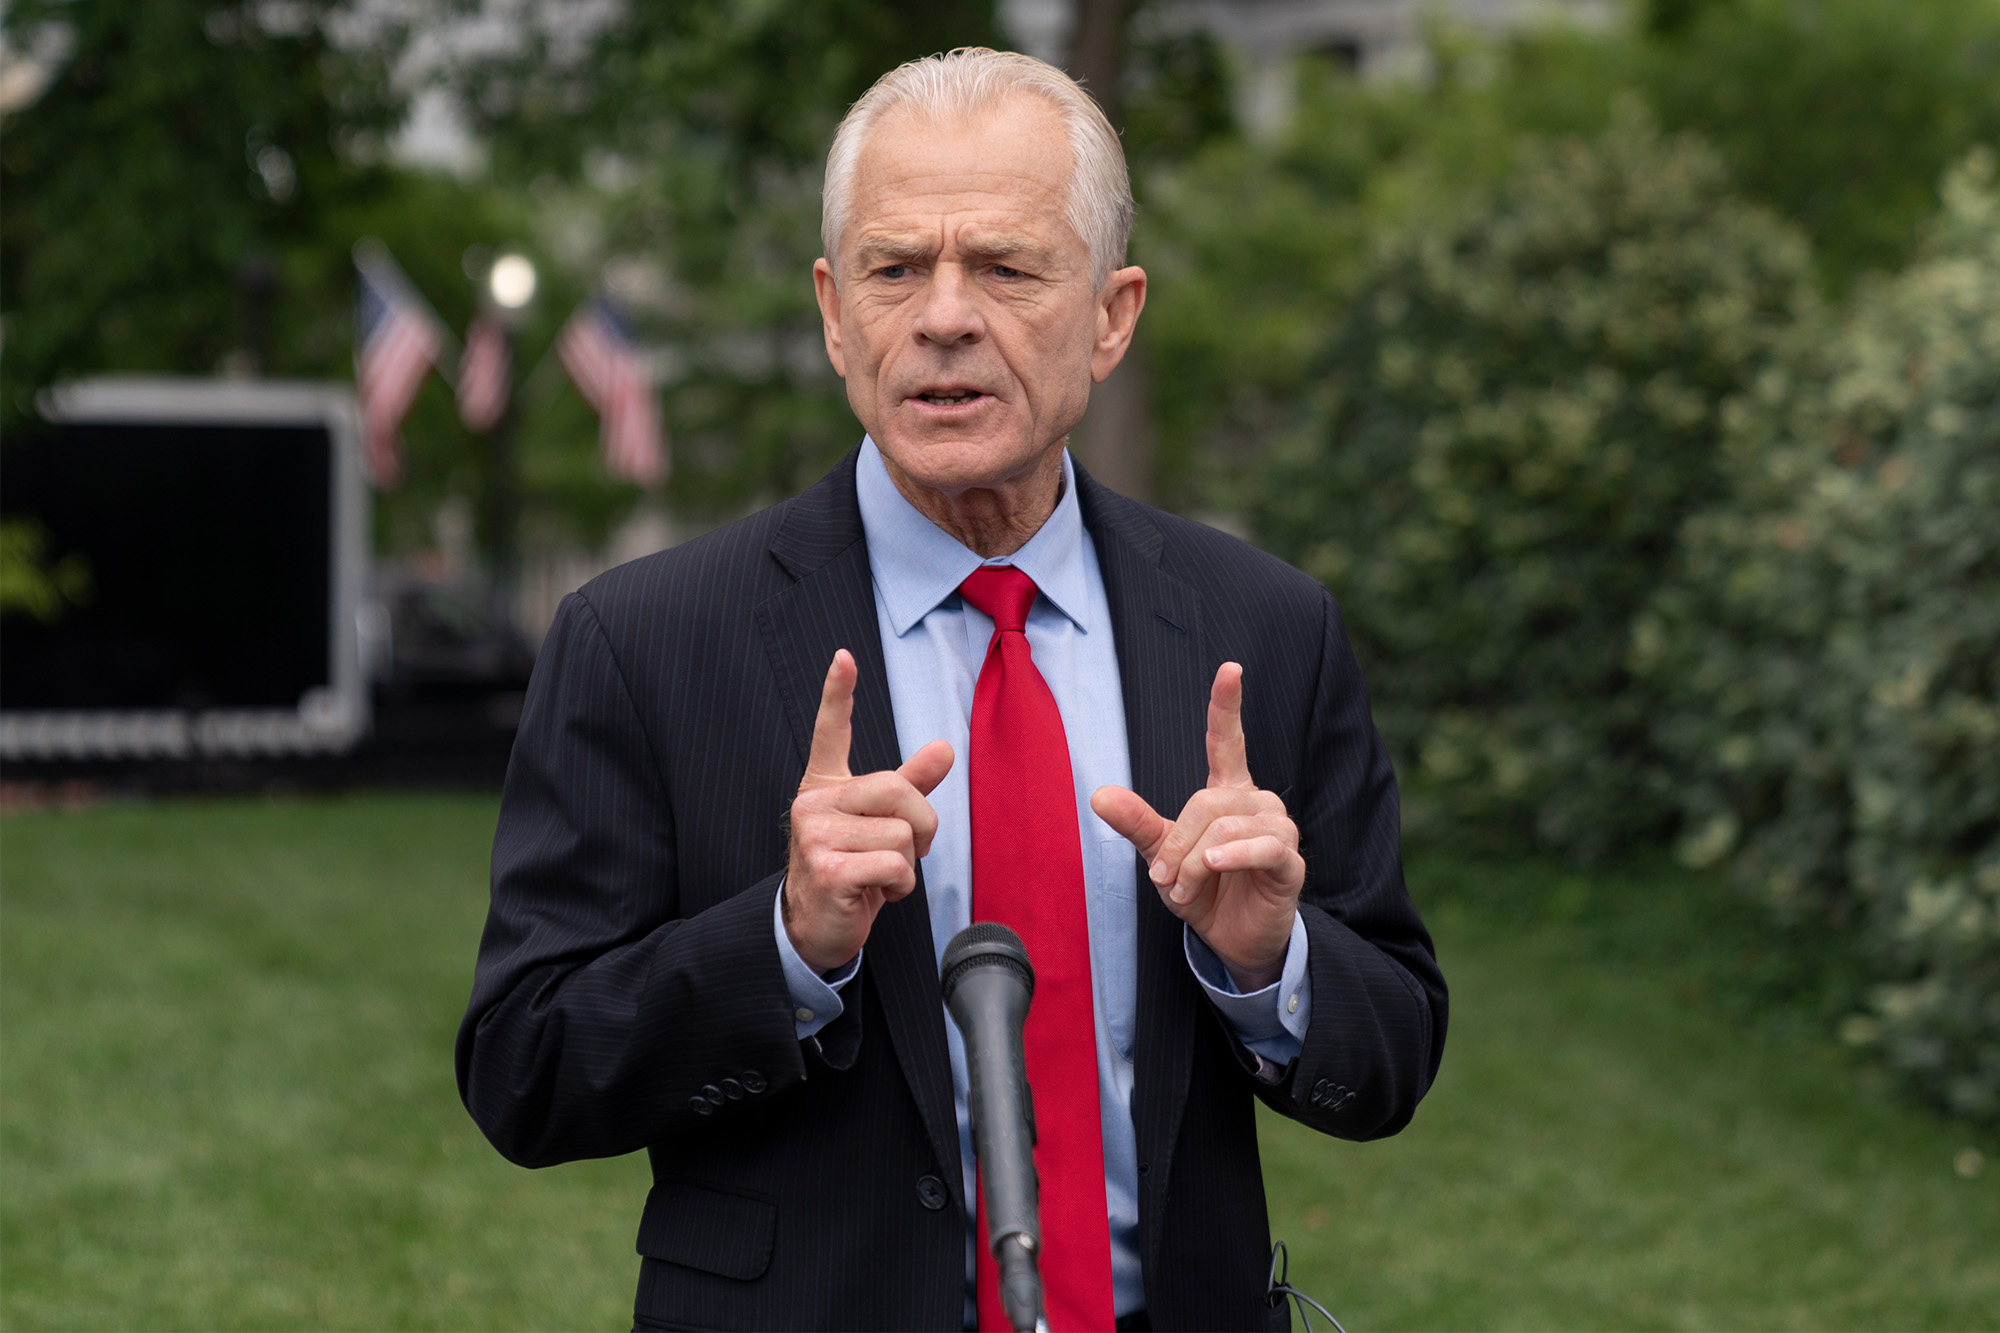 Former President Donald Trump's economic adviser Peter Navarro takes aim at Dr. Anthony Fauci in his new memoir of his experience in the White House.